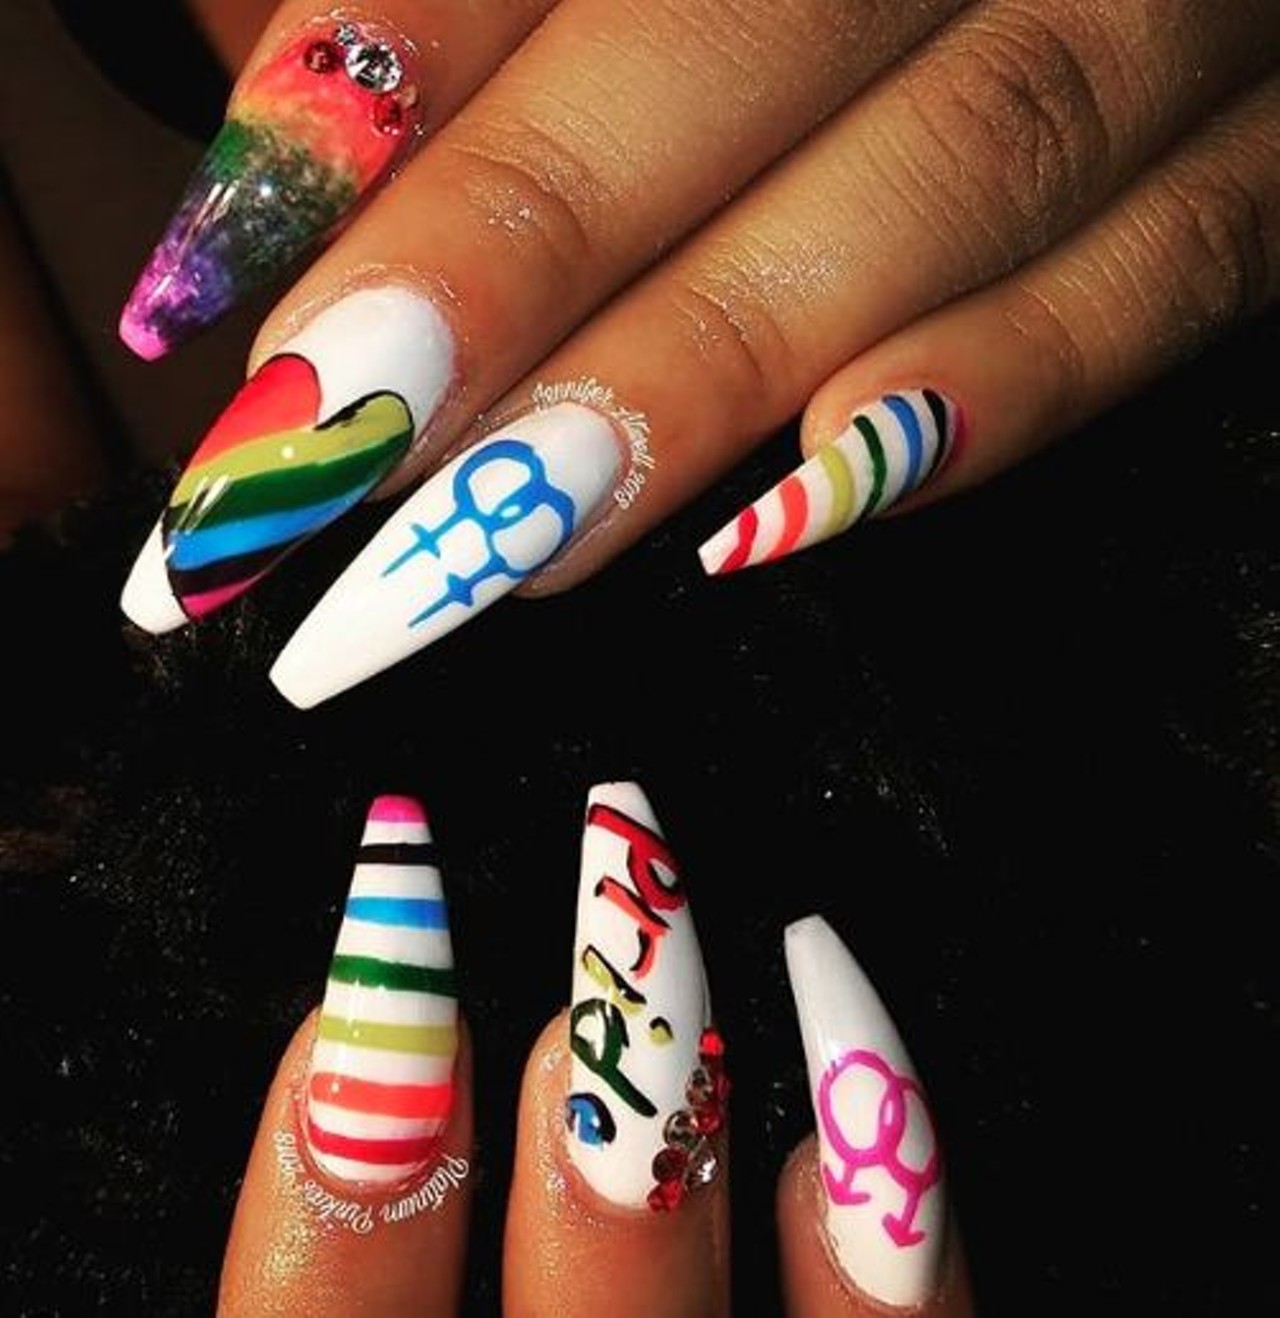  platinumpinkies
(567) 241-3618 (Text only)
Jennifer Atwell is a hairstylist and nail artist. She&#146;s done nurse-themed nails, Parisian-themed nails, LGBTQ pride-themed nails and much more.
Photo via platinumpinkies/Instagram